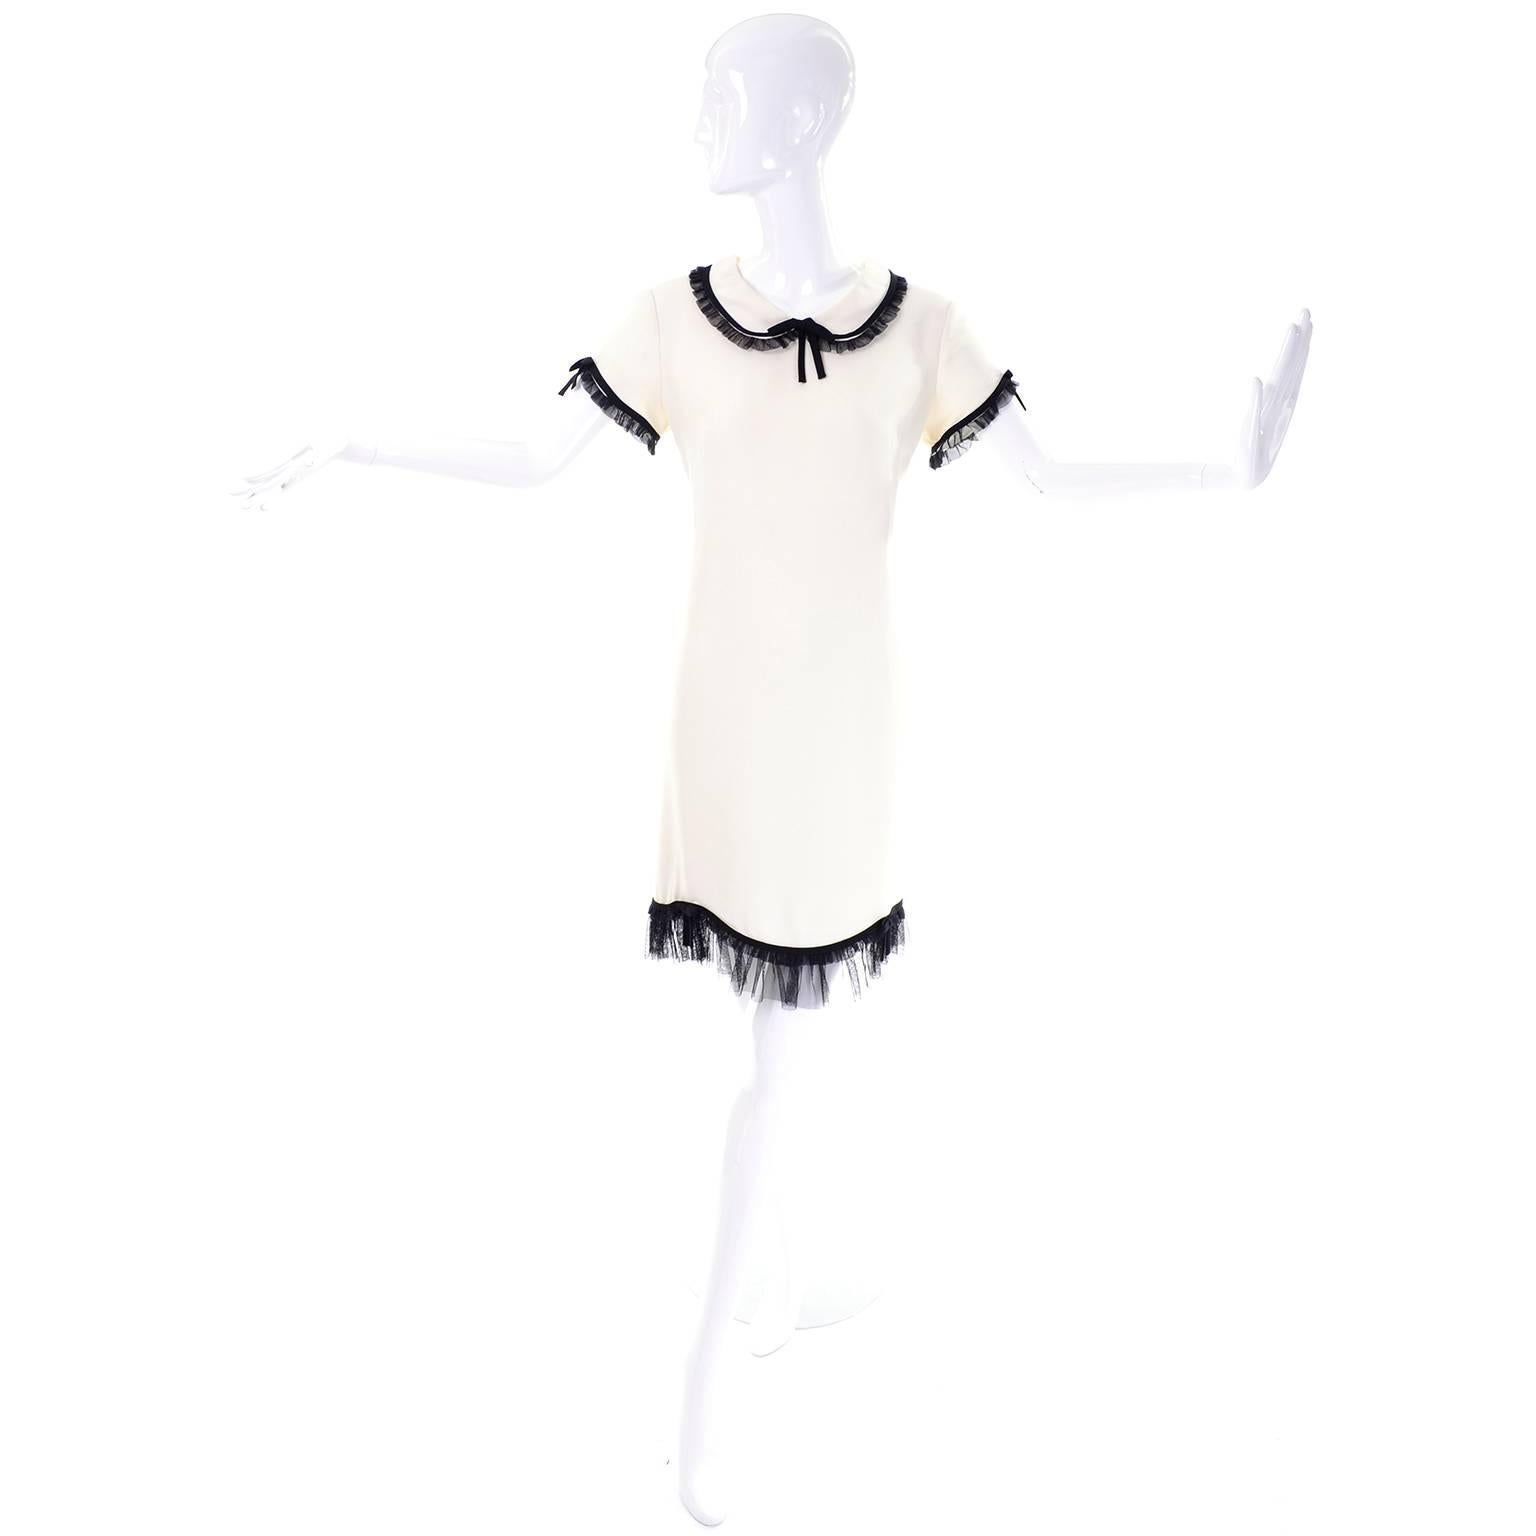 This adorable vintage dress from Moschino is made in an ivory rayon / acetate blend crepe and has black ruffled netting or tulle at the collar, hemline, and sleeves.  This Cheap and Chic by Moschino dress was made in Italy,  is fully lined and